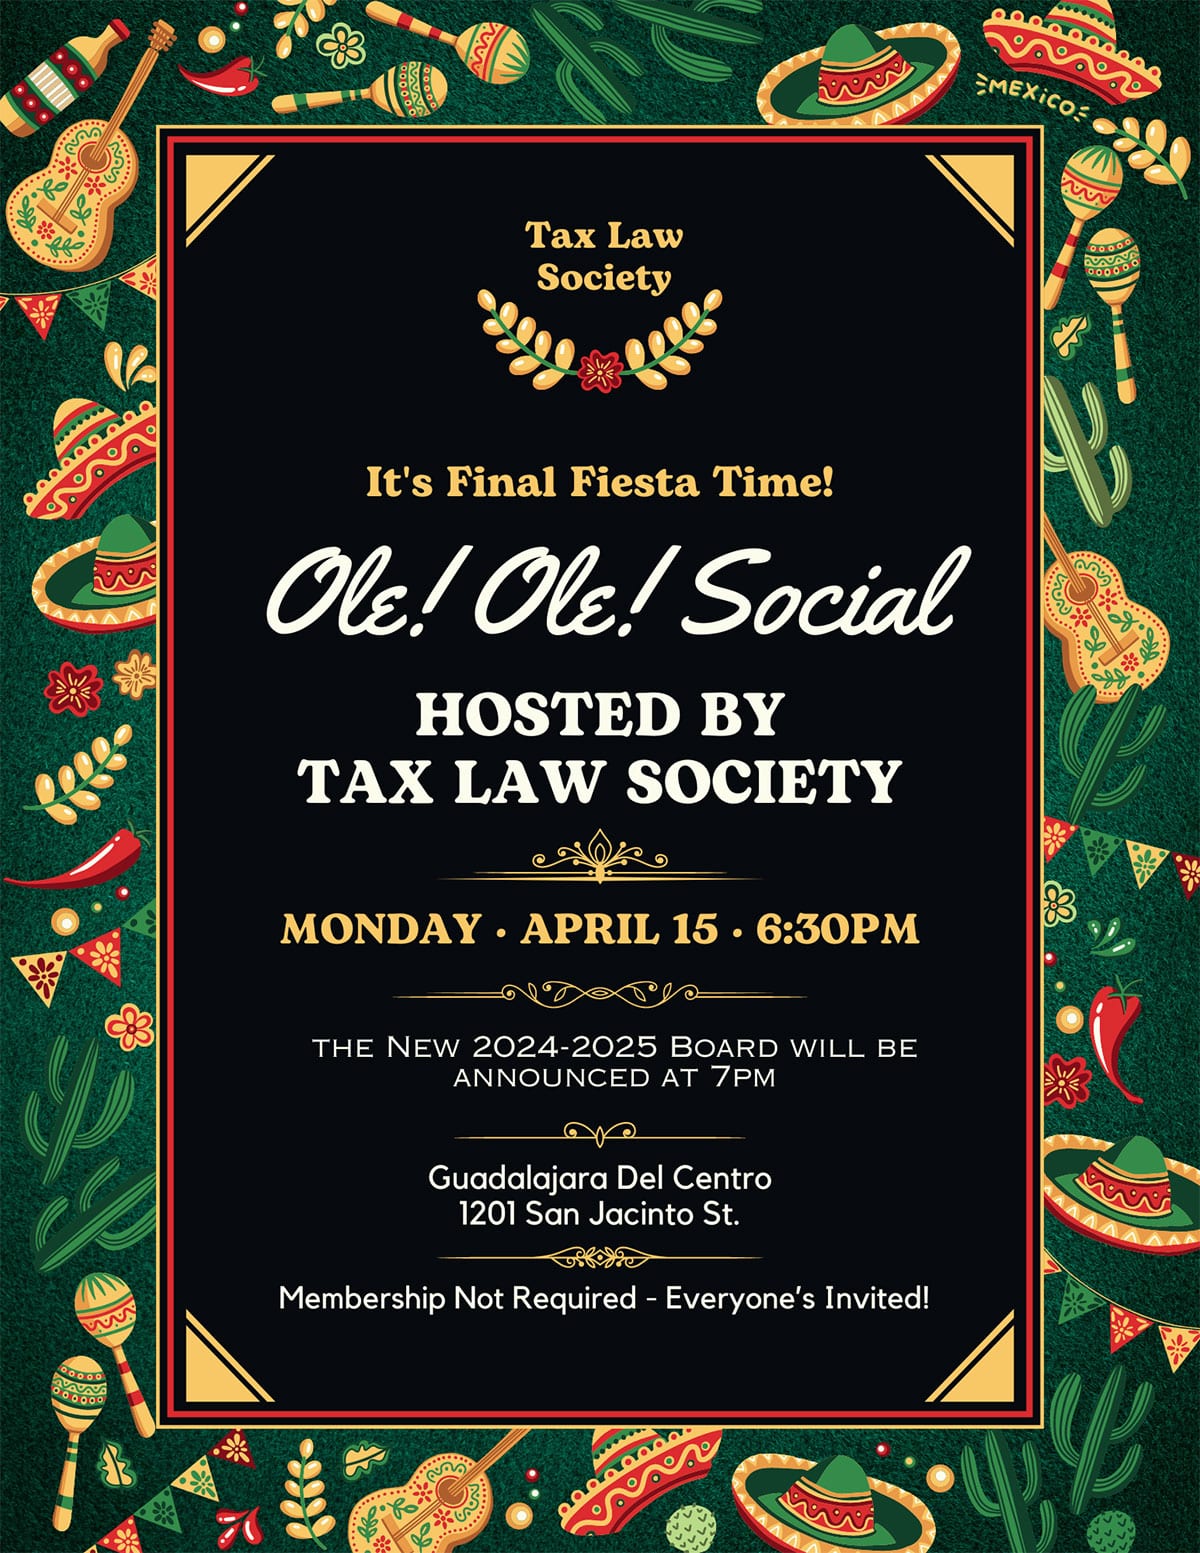 Ole! Ole! Social Hosted by the Tax Law Society